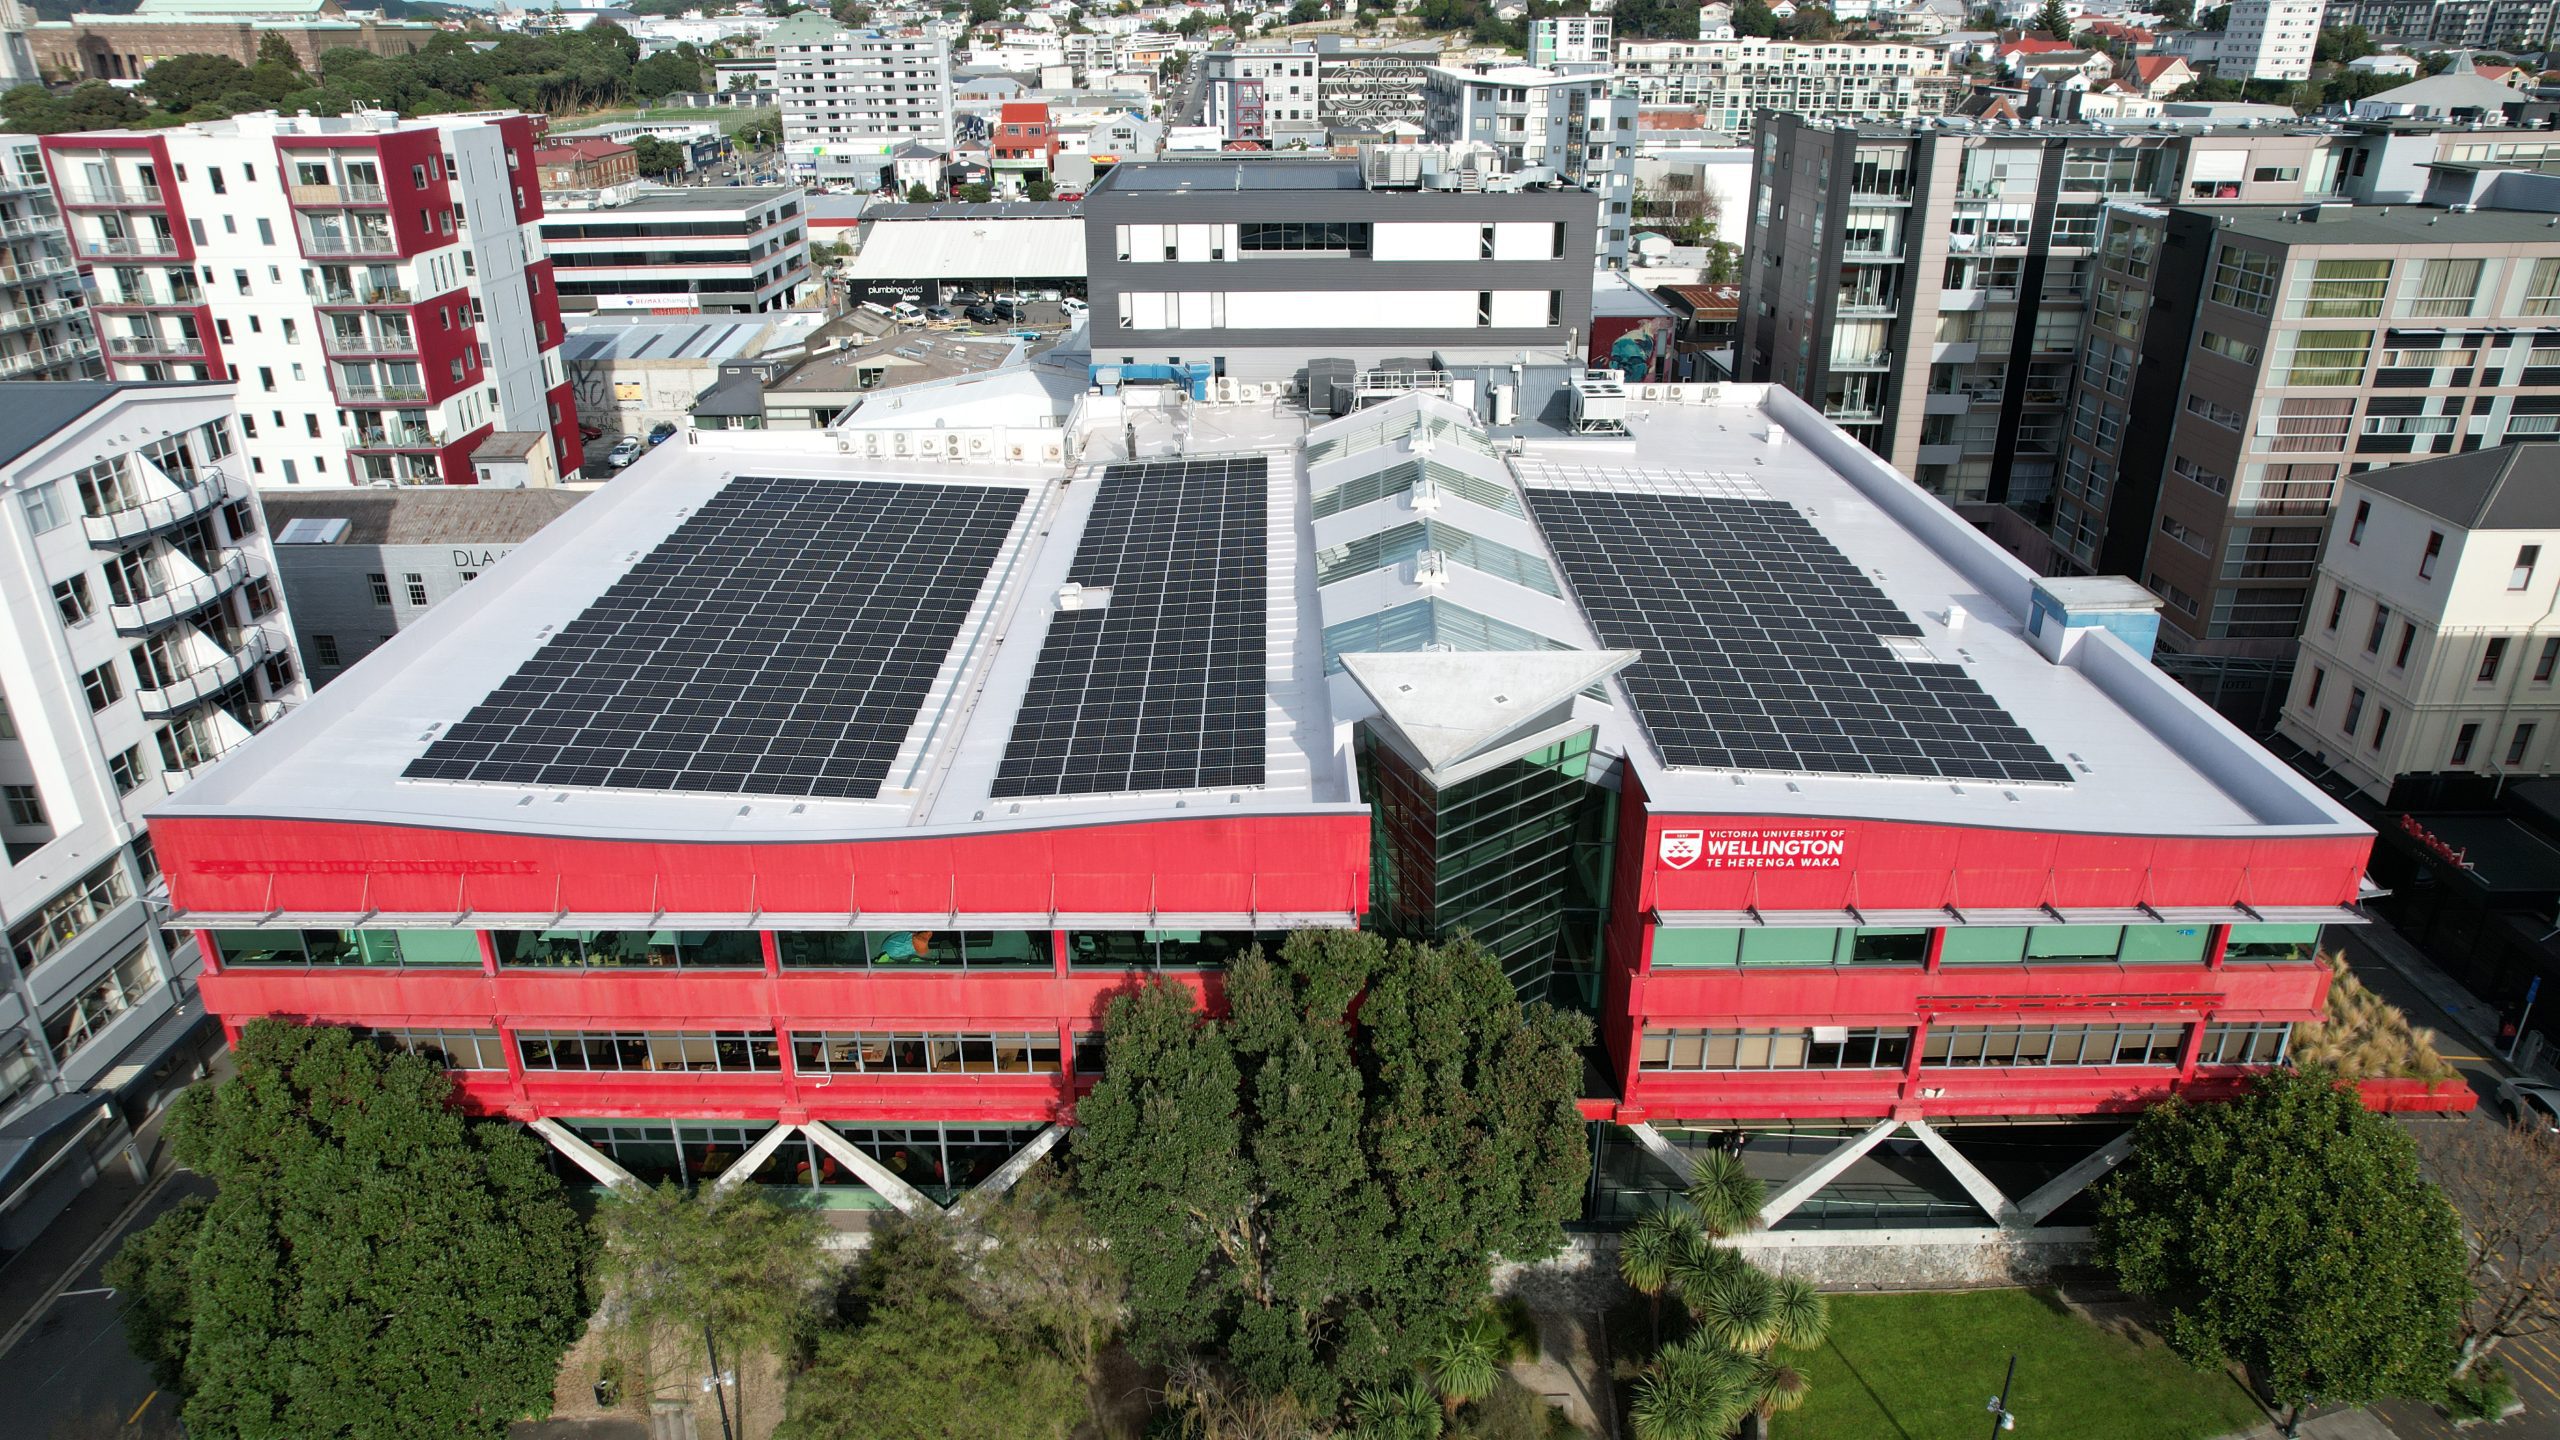 RoofLogic product information for Wellington School of Architecture and Design